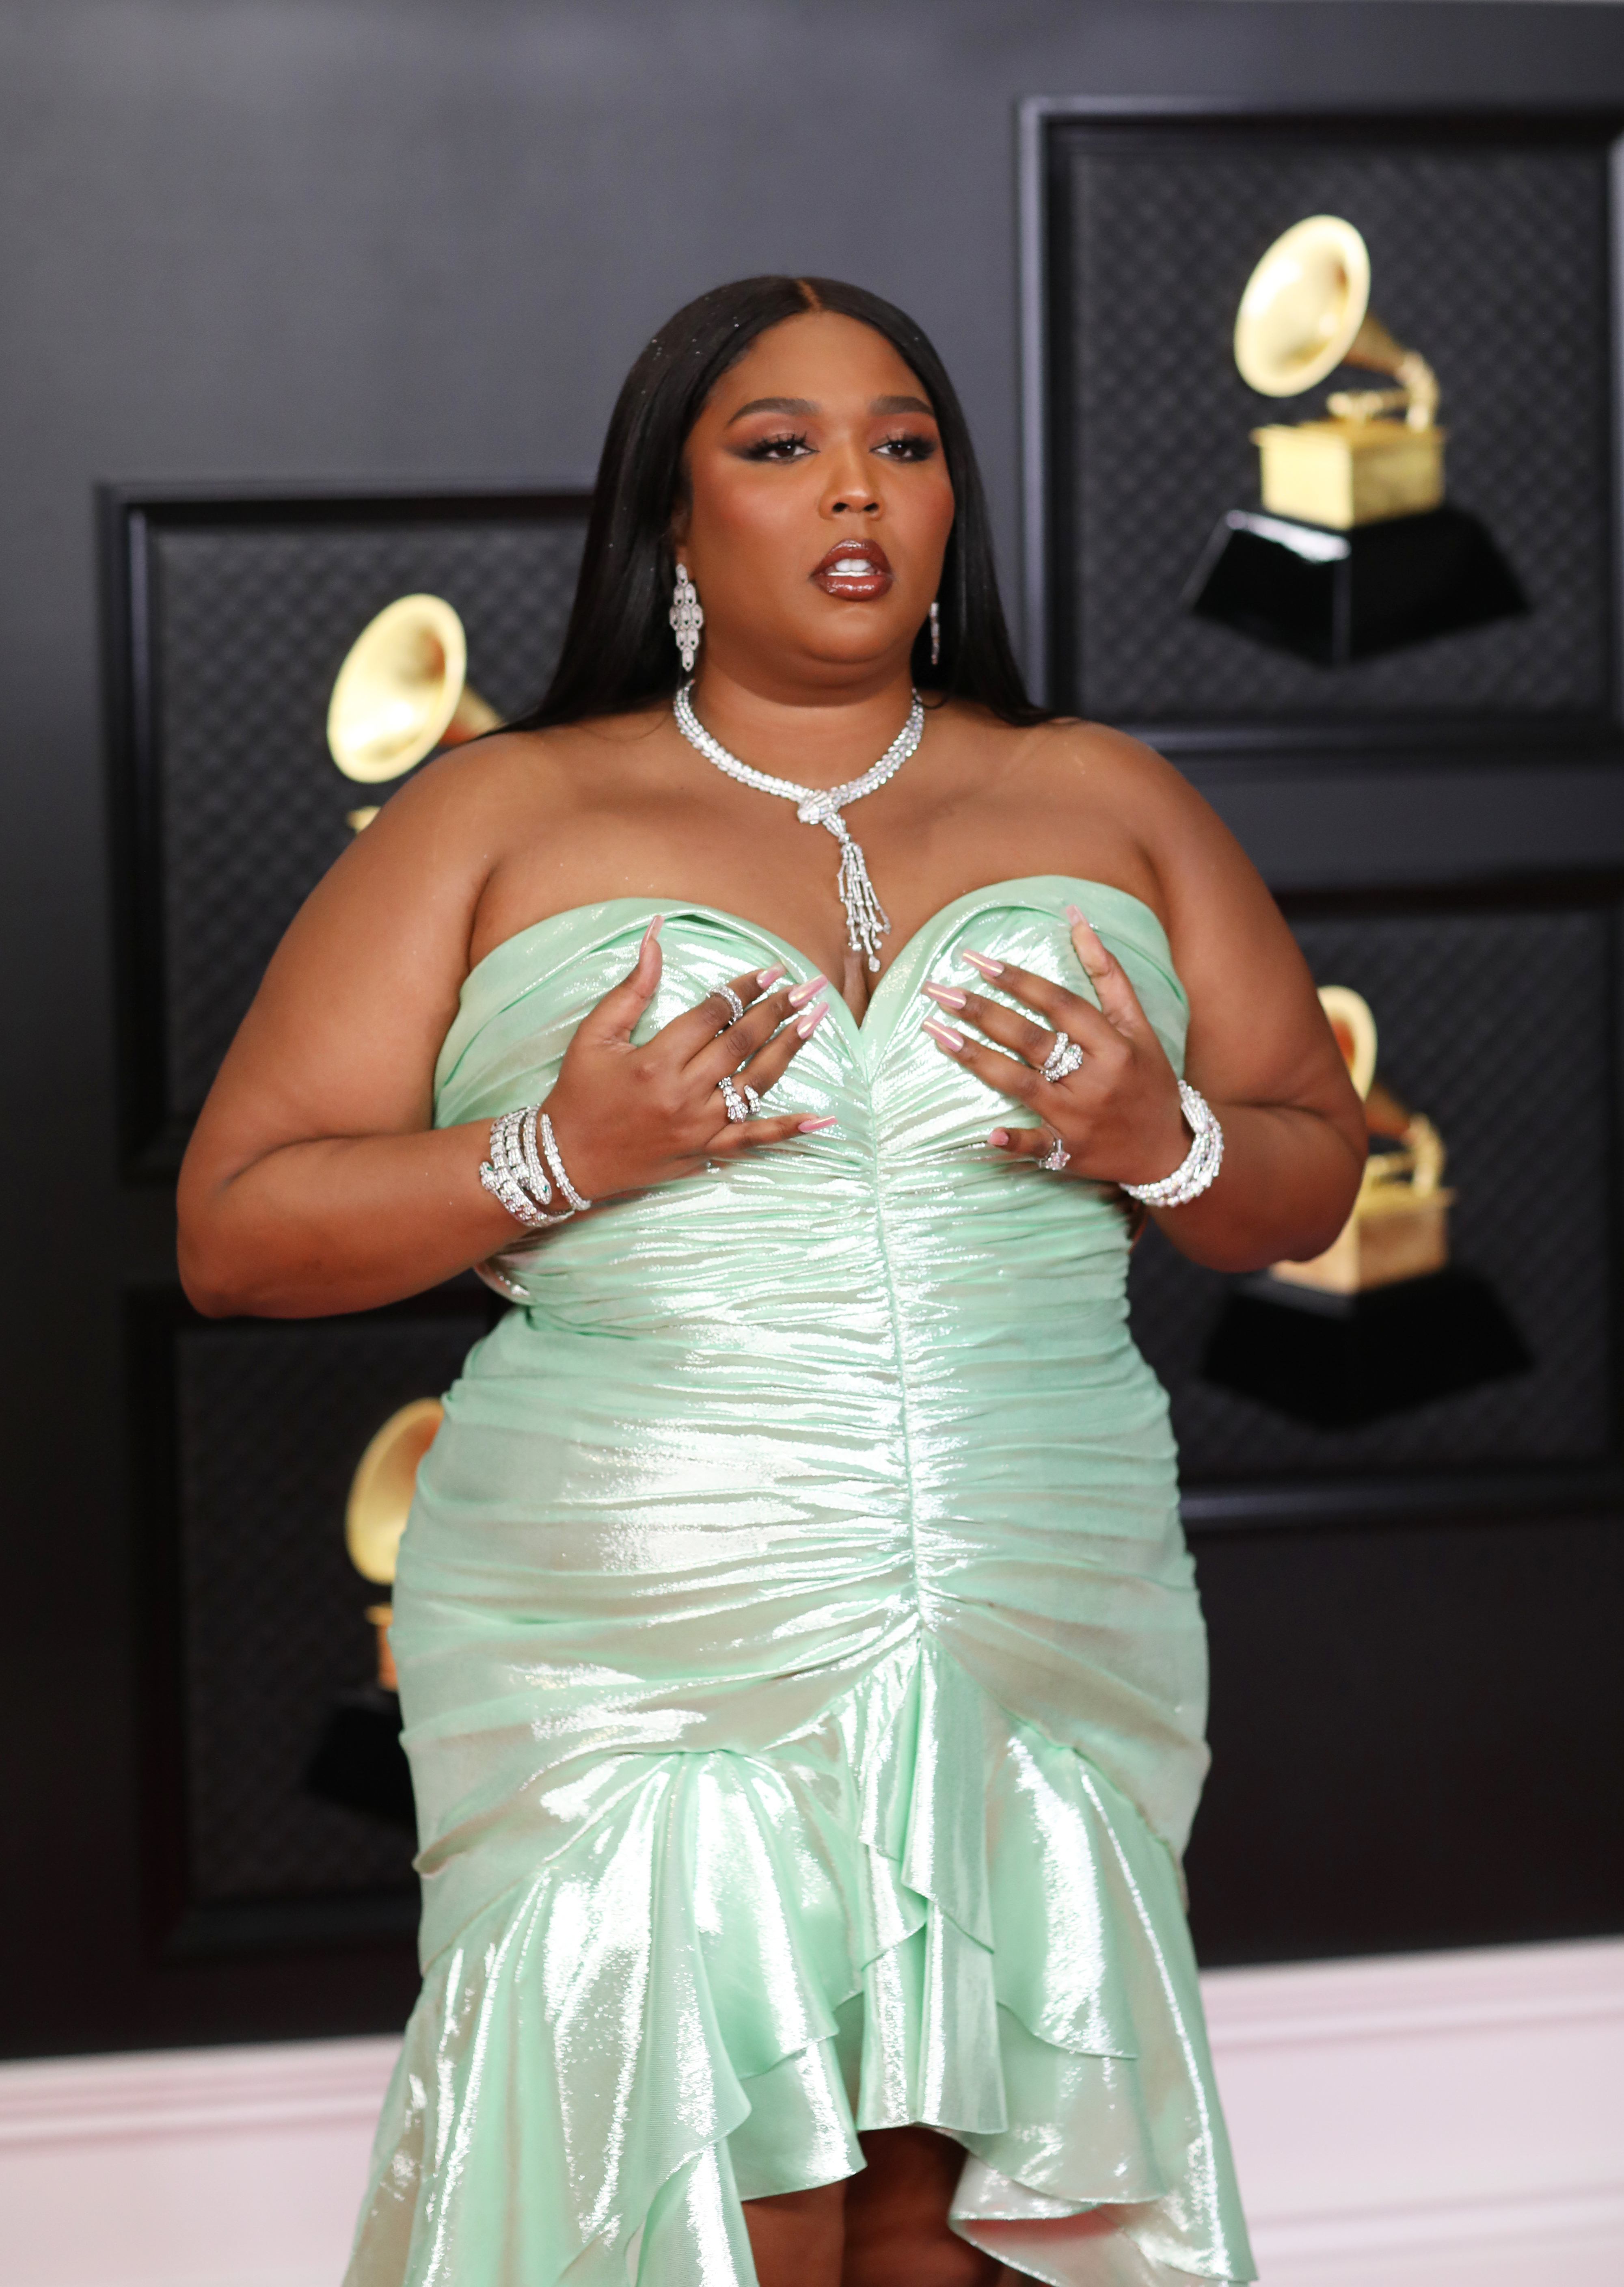 Close-up of Lizzo at the Grammys in a strapless gown